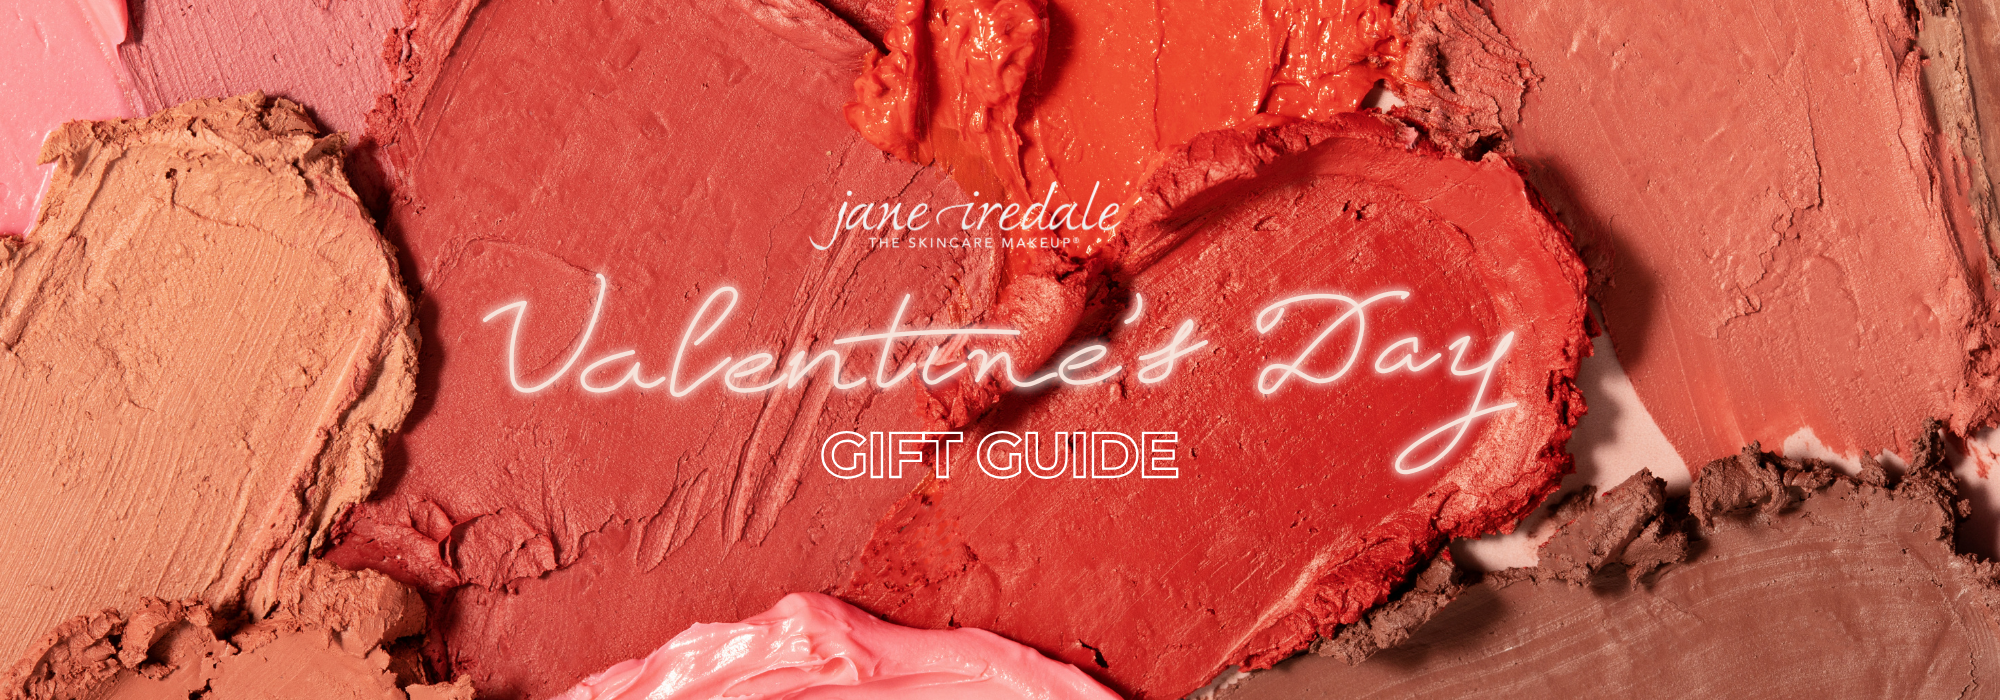 Jane Iredale Valentine's Day Gift Guide